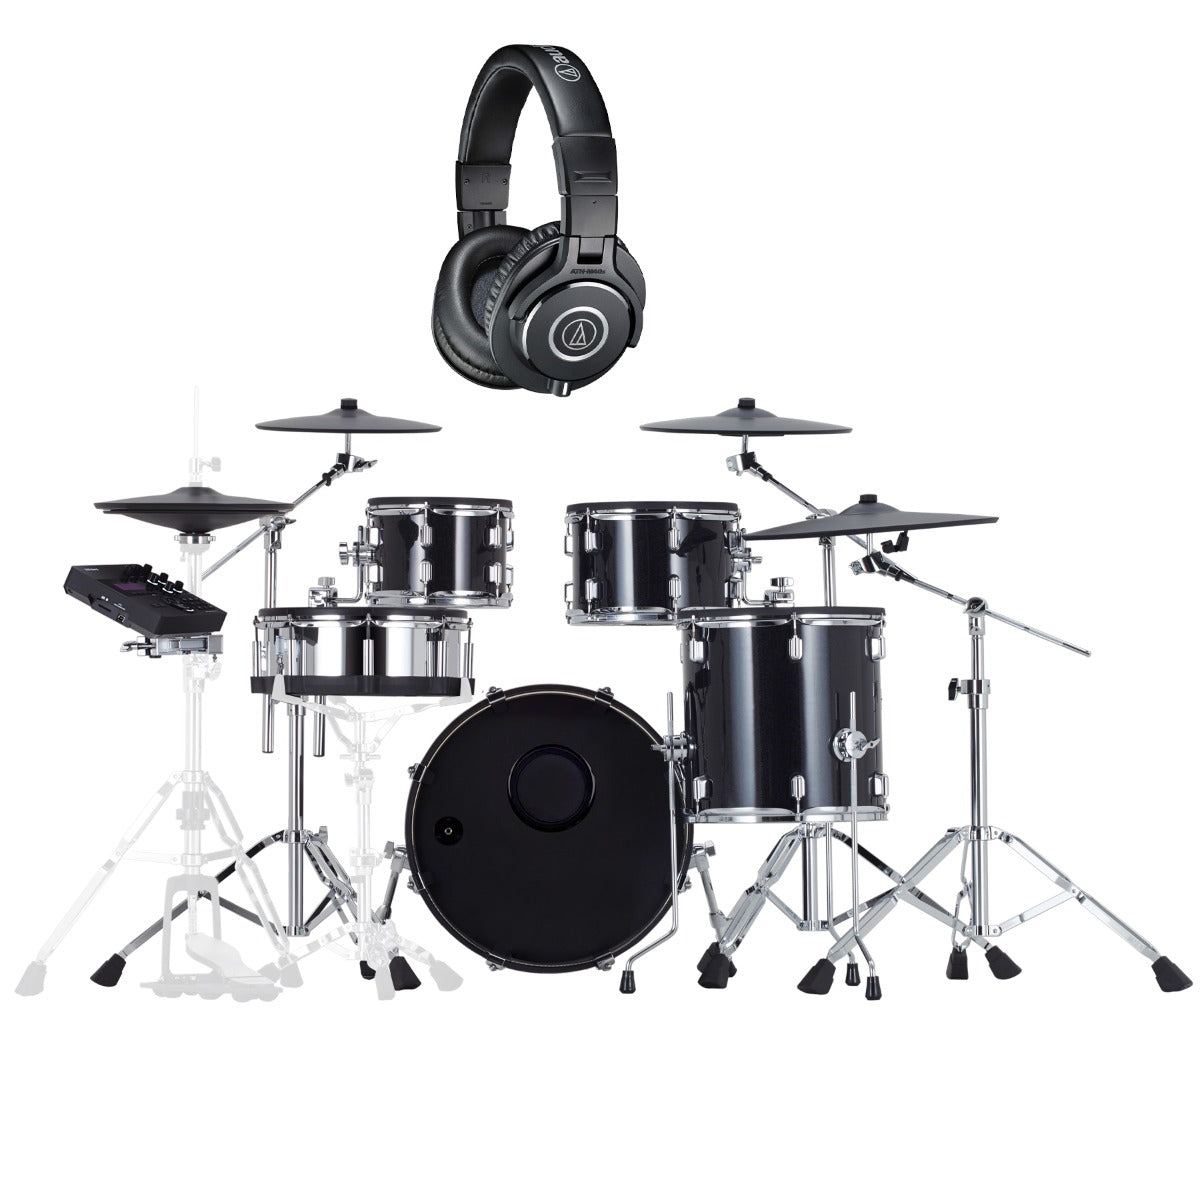 Collage of the Roland VAD507 V-Drums Acoustic Design 5pc Kit BONUS PAK showing included components